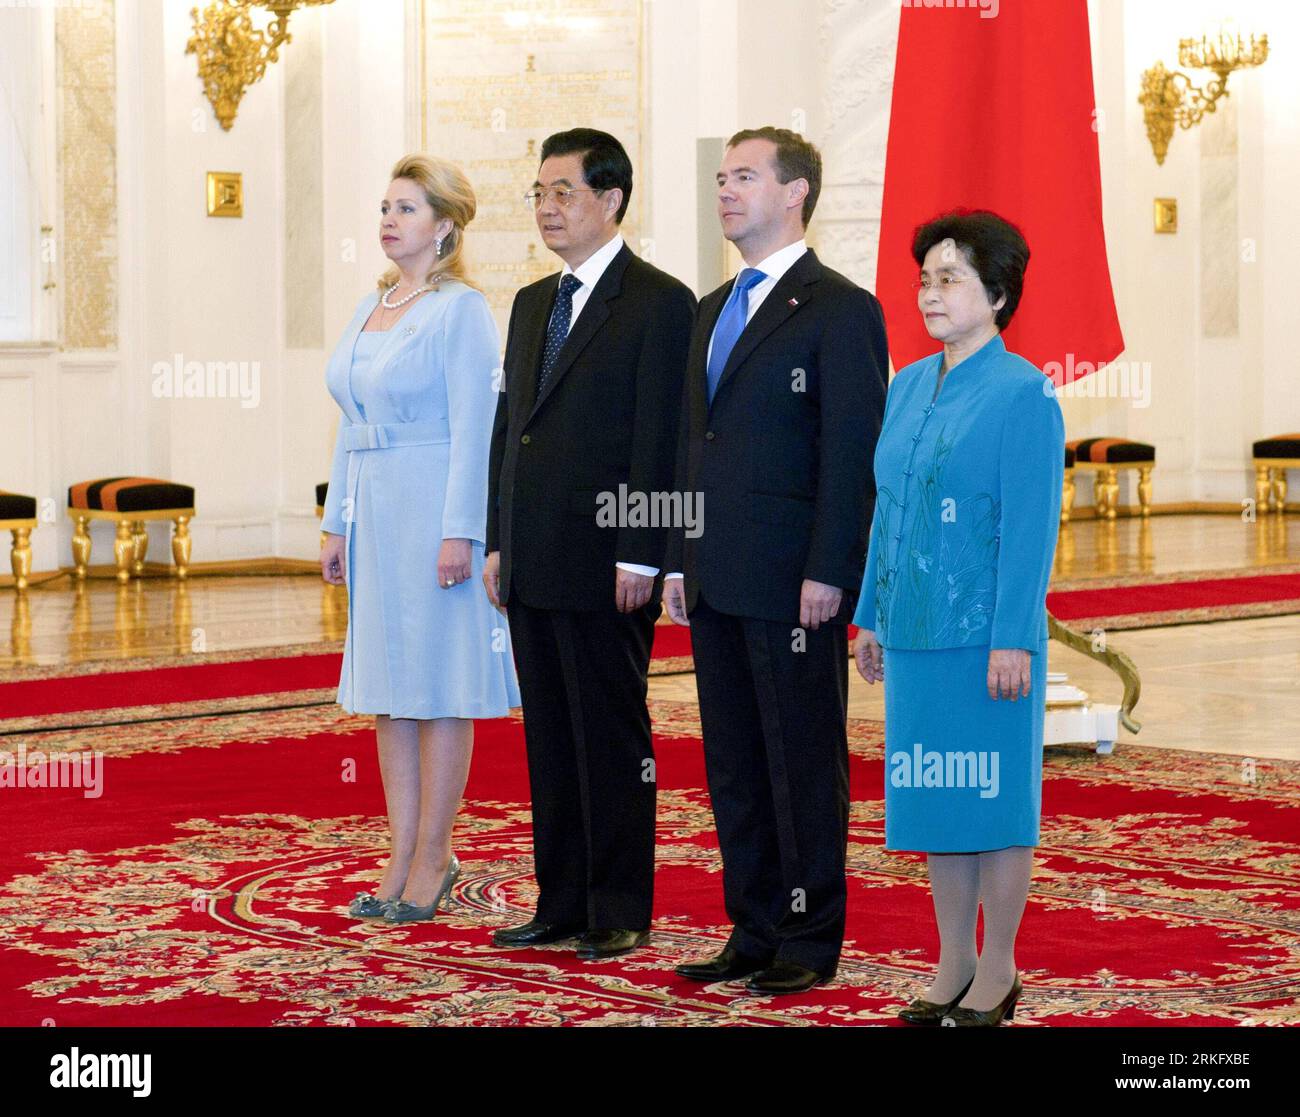 Bildnummer: 55464847  Datum: 17.06.2011  Copyright: imago/Xinhua (110616) -- MOSCOW, June 16, 2011 (Xinhua) -- Visiting Chinese President Hu Jintao (2nd L), his wife Liu Yongqing (1st R), Russian President Dmitry Medvedev (2nd R) and his wife Svetlana Medvedeva (1st L) pose for a photo during a welcome ceremony in Moscow, capital of Russia, June 16, 2011. (Xinhua/Li Xueren) (zn) RUSSIA-CHINA-HU JINTAO-DMITRY MEDVEDEV-WELCOME CEREMONY (CN) PUBLICATIONxNOTxINxCHN People Politik Staatsbesuch xcb x0x 2011 quer premiumd     Bildnummer 55464847 Date 17 06 2011 Copyright Imago XINHUA  Moscow June 16 Stock Photo